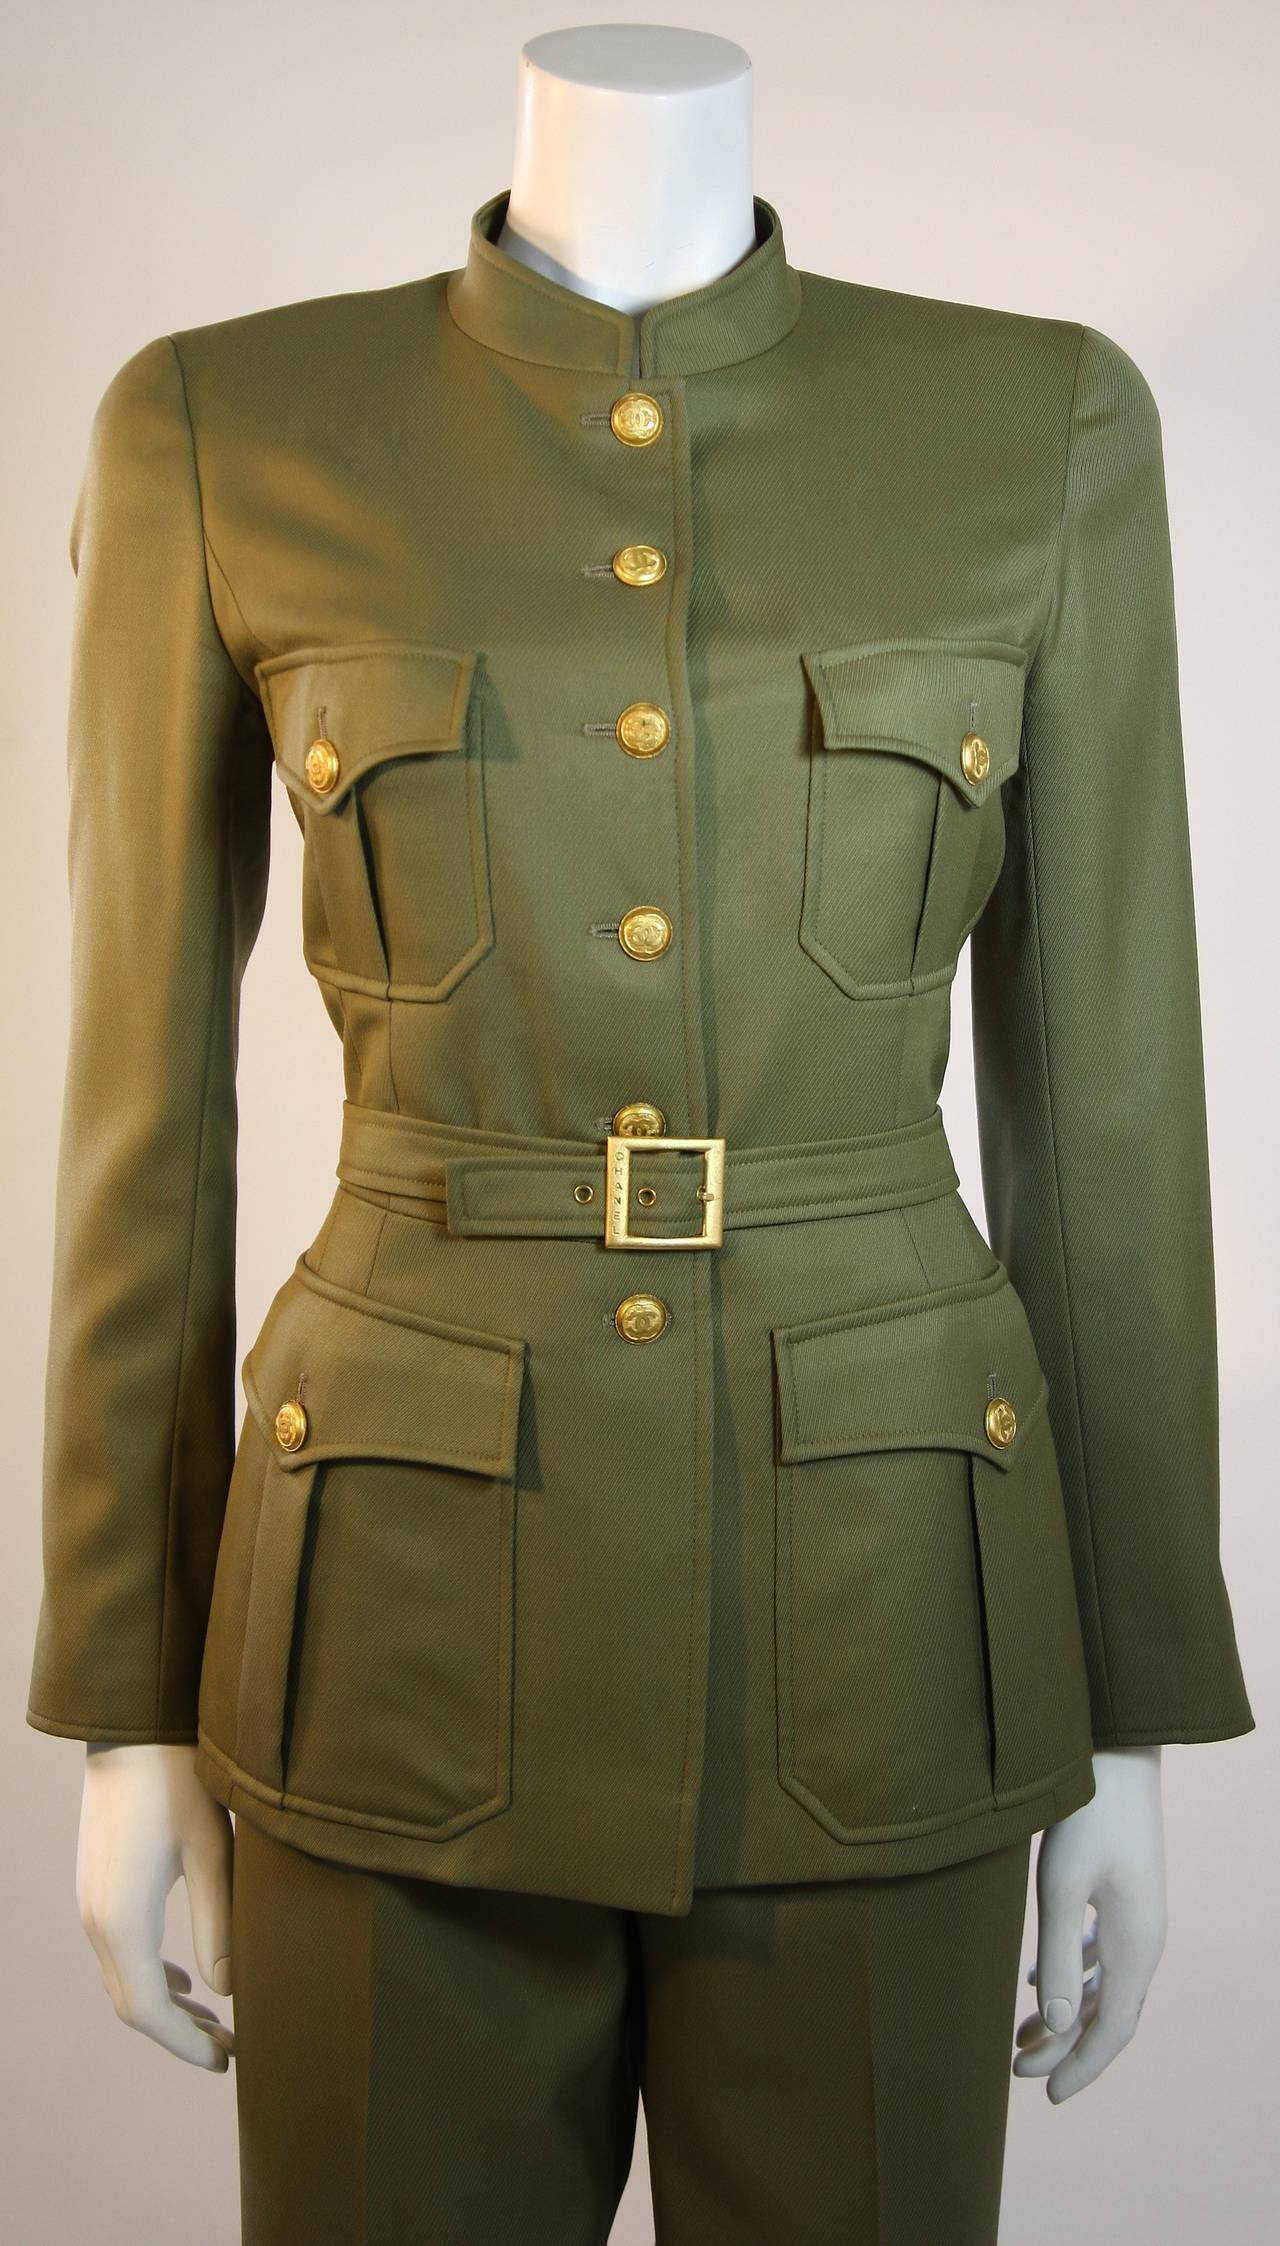 Fabulous lightweight army green wool with a ribbed texture akin to silk faille, lined in silk, two piece suit by Chanel Boutique, 96A. The fitted waist jacket boasts 16 gold linked C buttons down the front, on the pockets, and cut detail cuffs. The